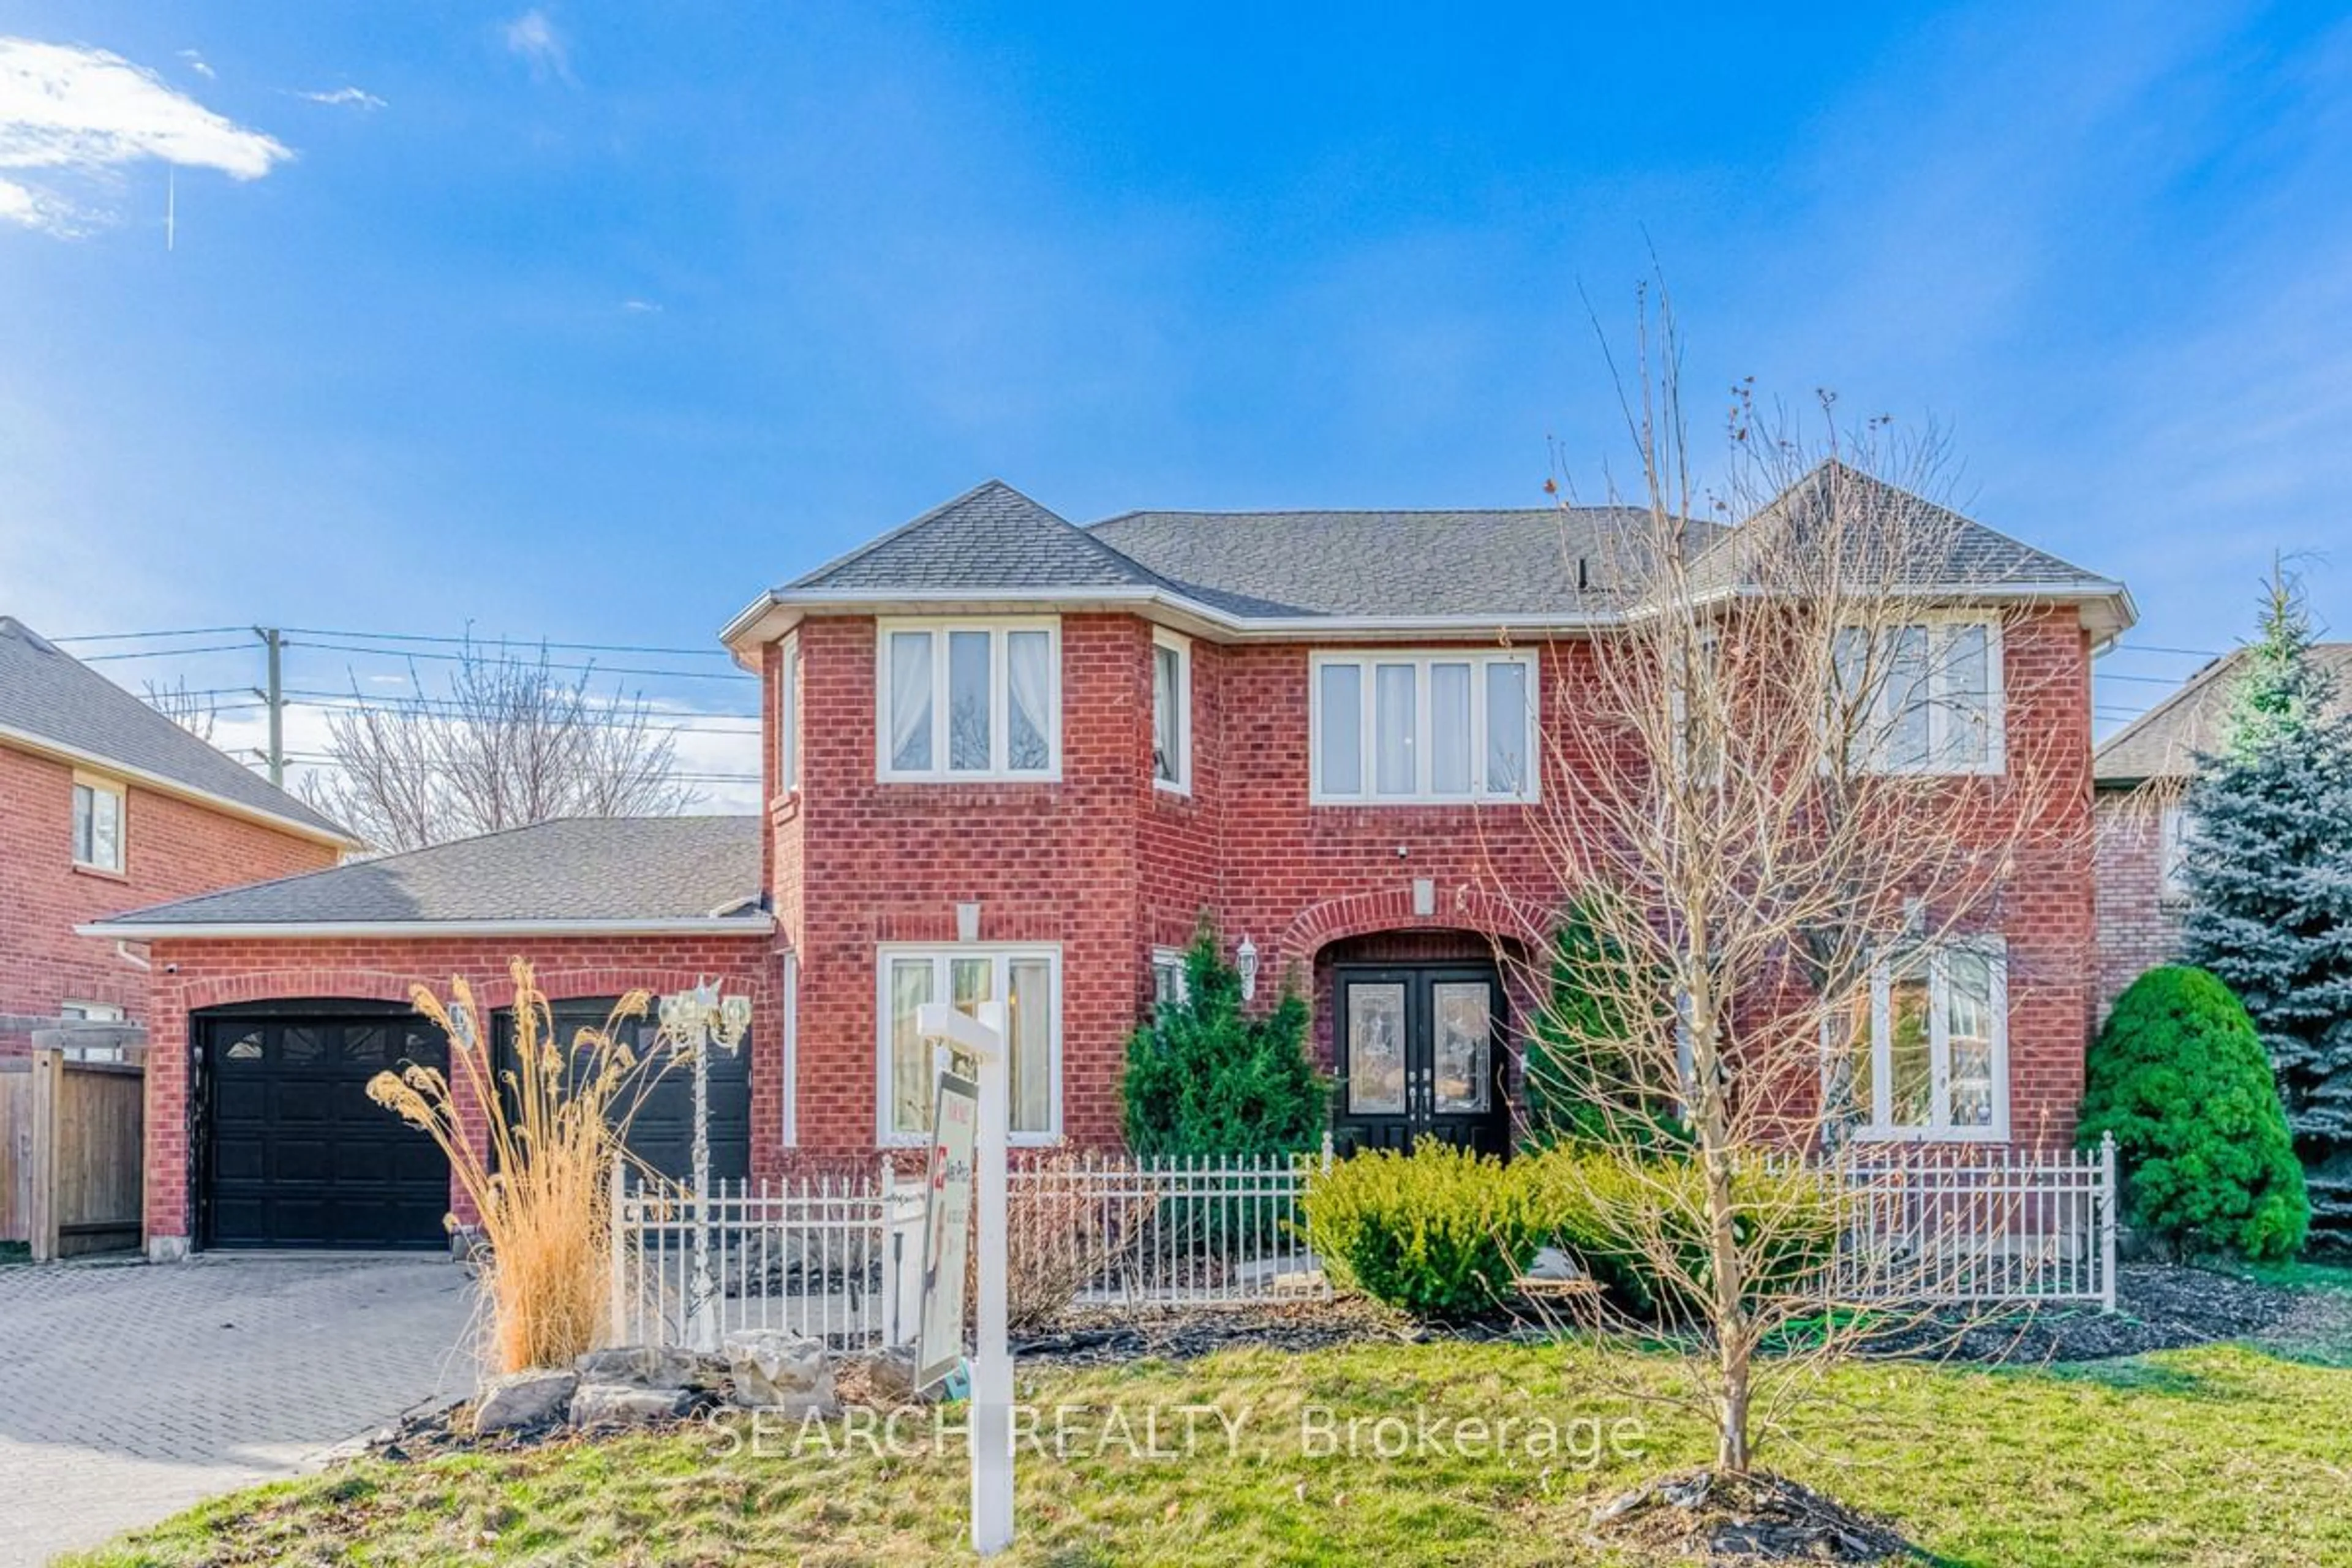 Home with brick exterior material for 8 Ridelle Crt, Brampton Ontario L6Z 4M3